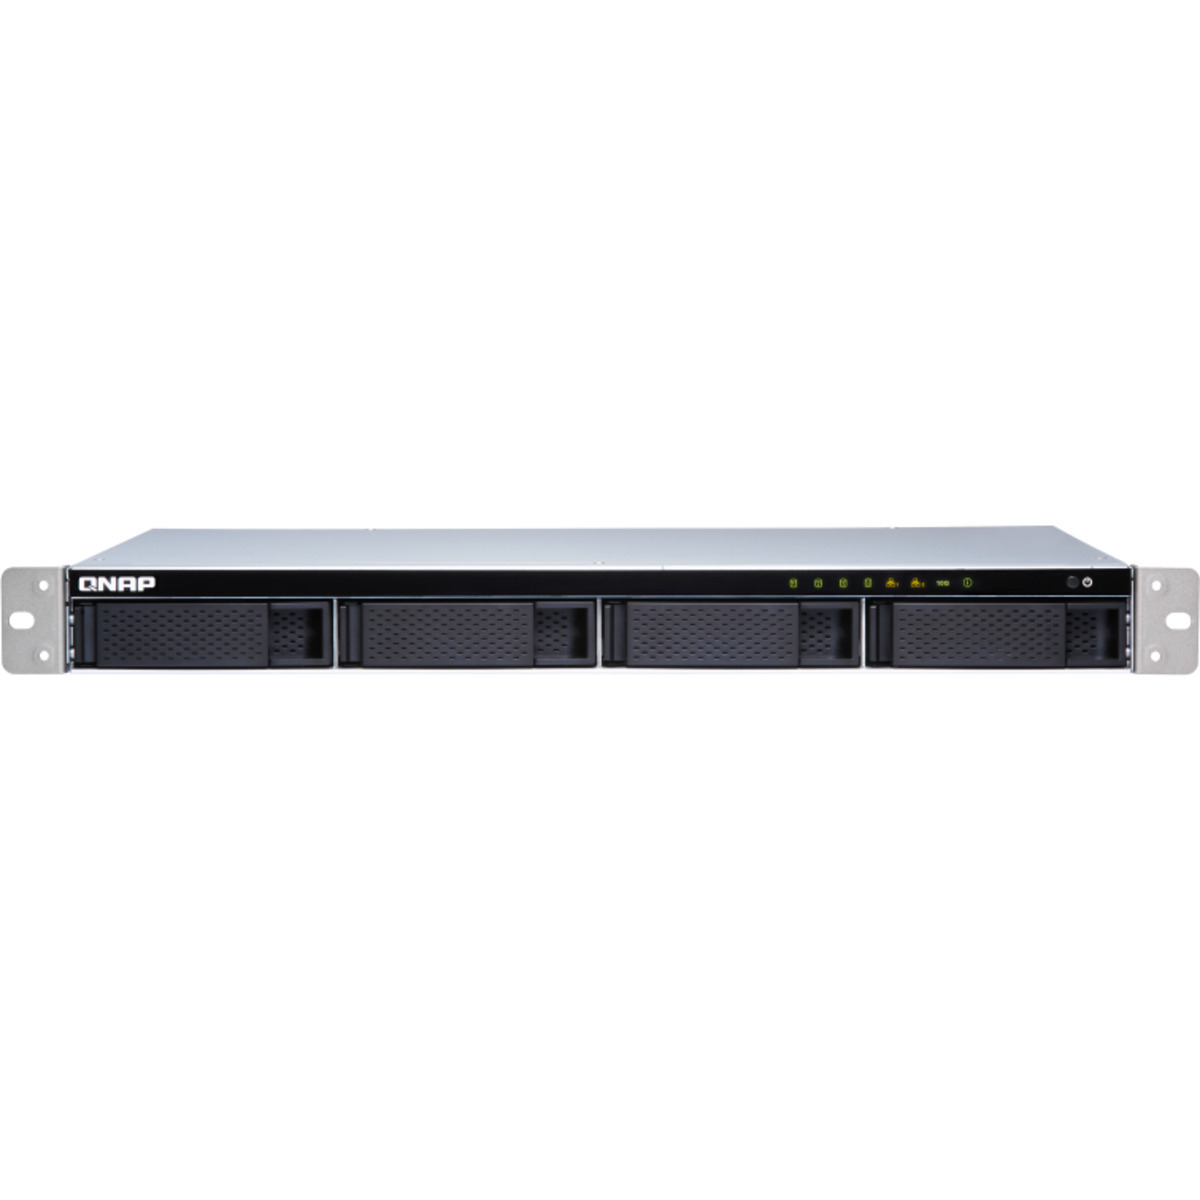 QNAP TS-431XeU 6tb 4-Bay RackMount Multimedia / Power User / Business NAS - Network Attached Storage Device 3x2tb Crucial MX500 CT2000MX500SSD1 2.5 560/510MB/s SATA 6Gb/s SSD CONSUMER Class Drives Installed - Burn-In Tested - FREE RAM UPGRADE TS-431XeU